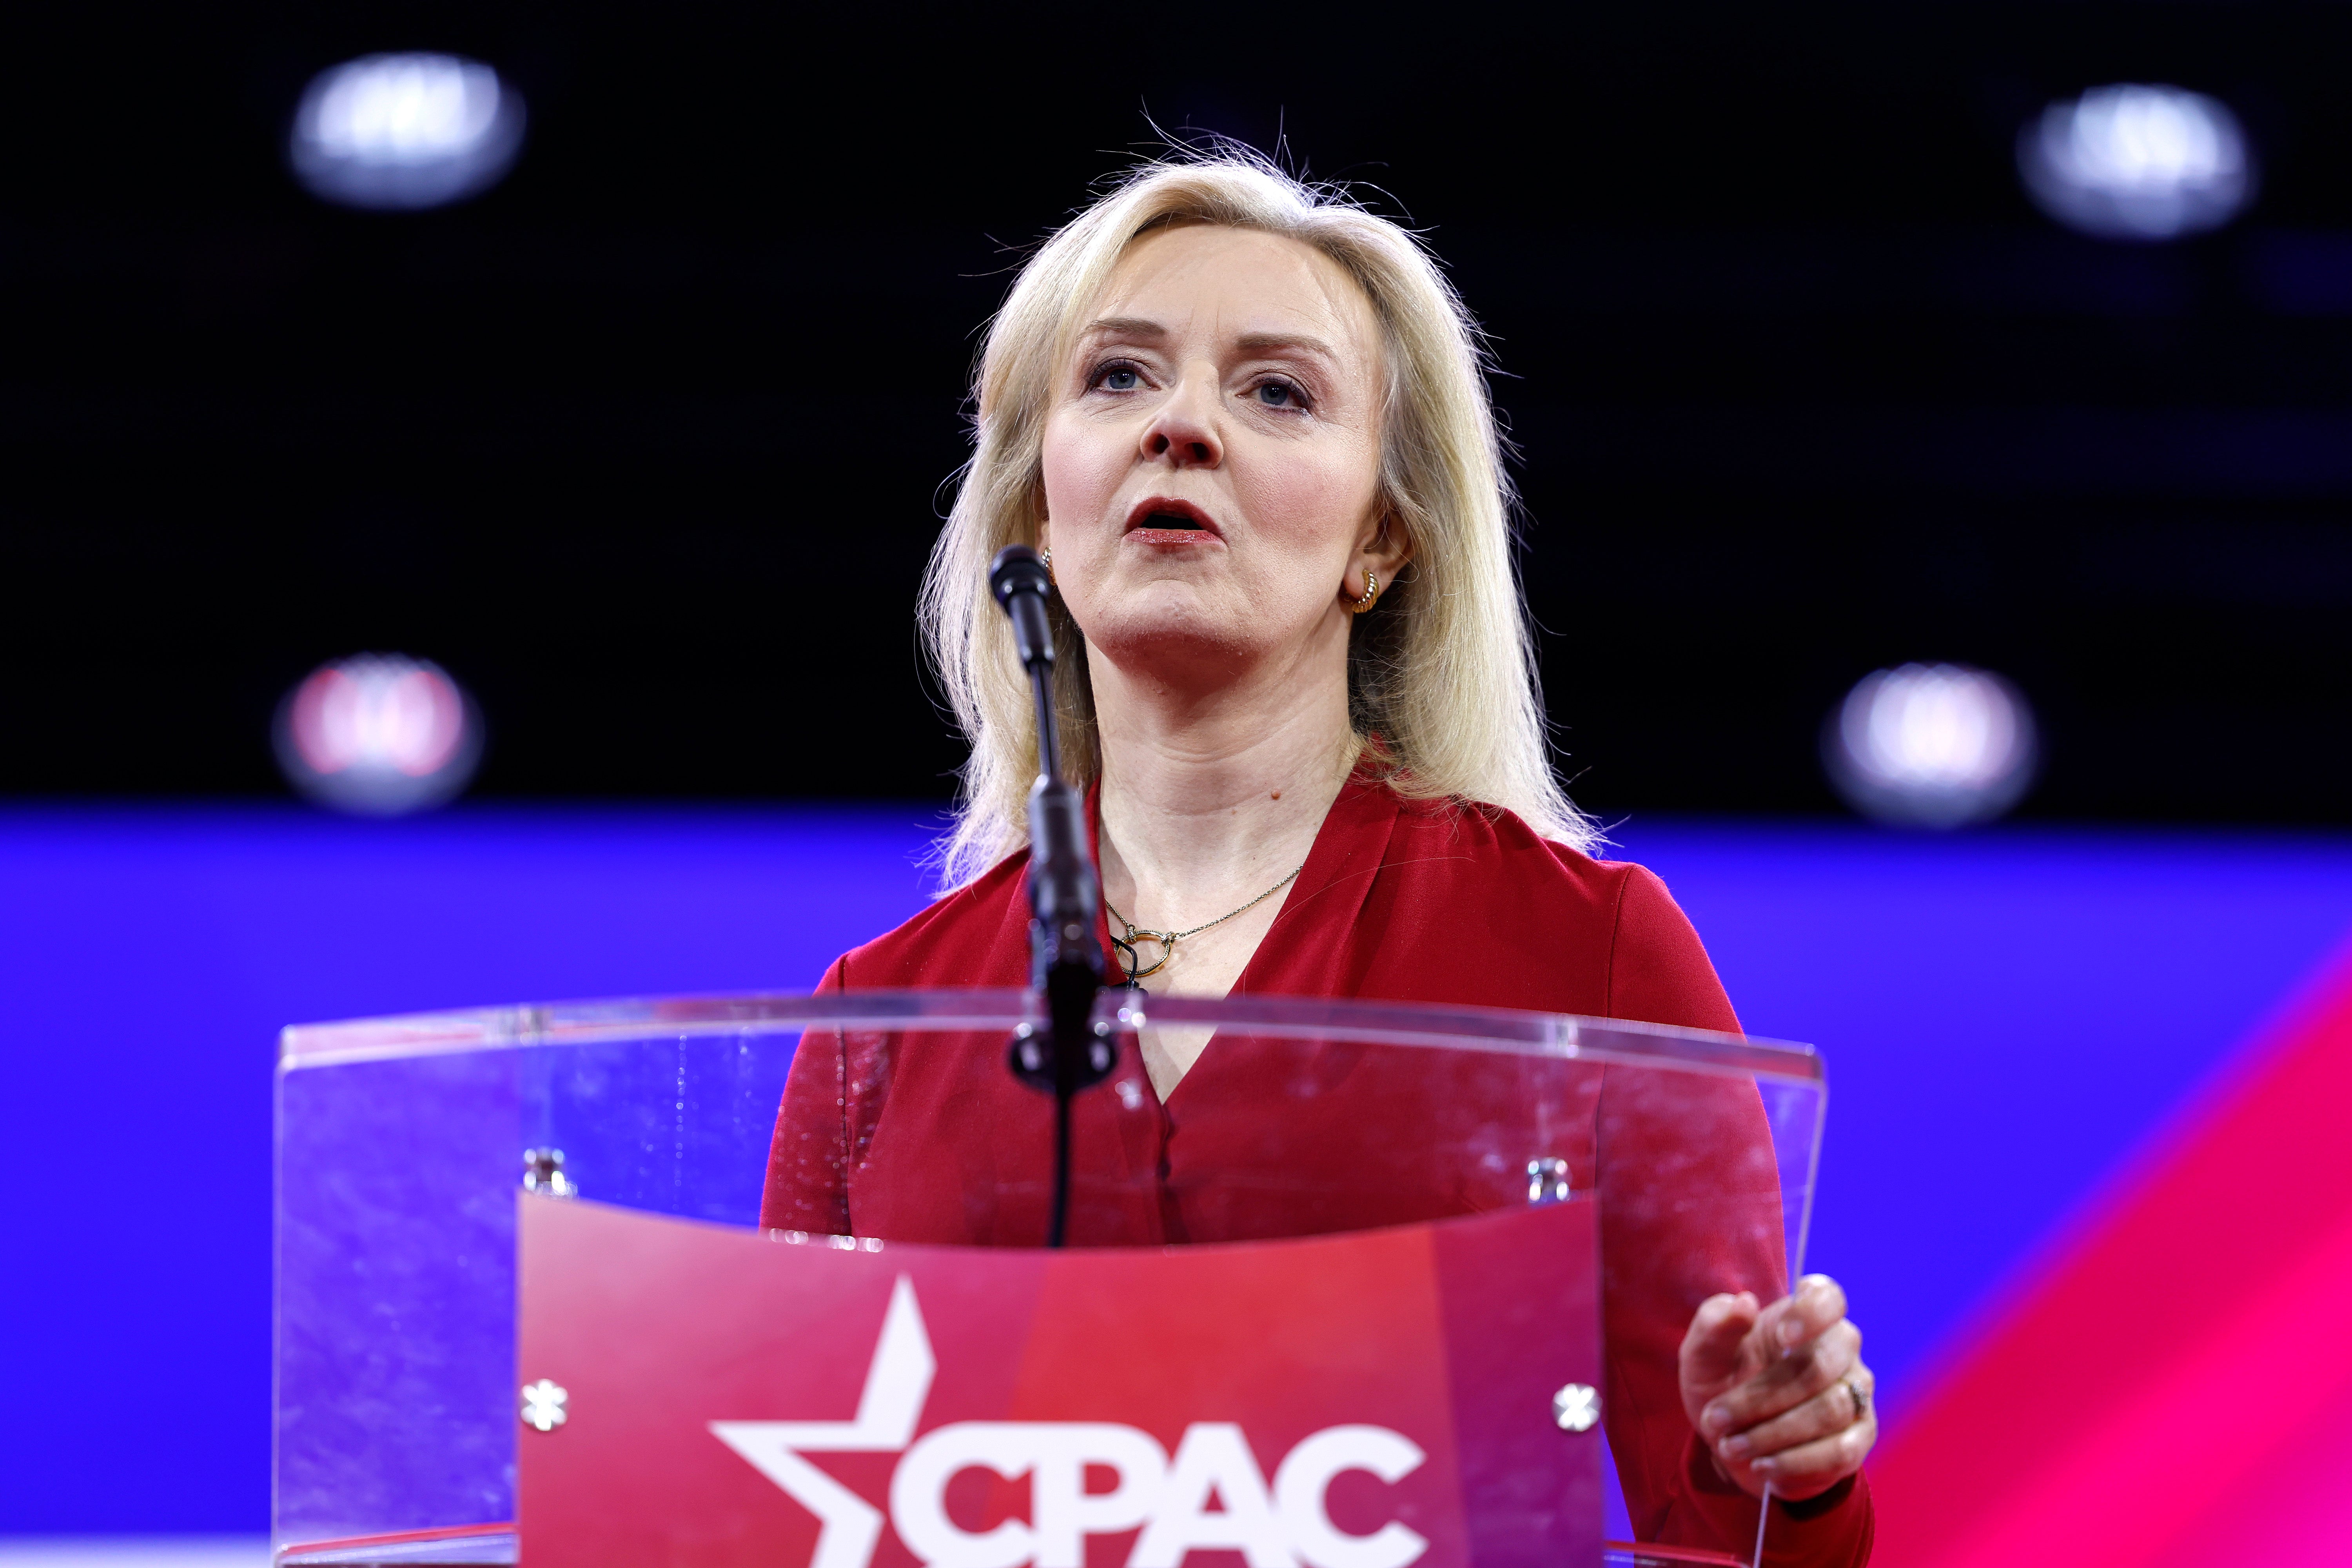 Liz Truss speaking at the Conservative Political Action Conference (CPAC) in February